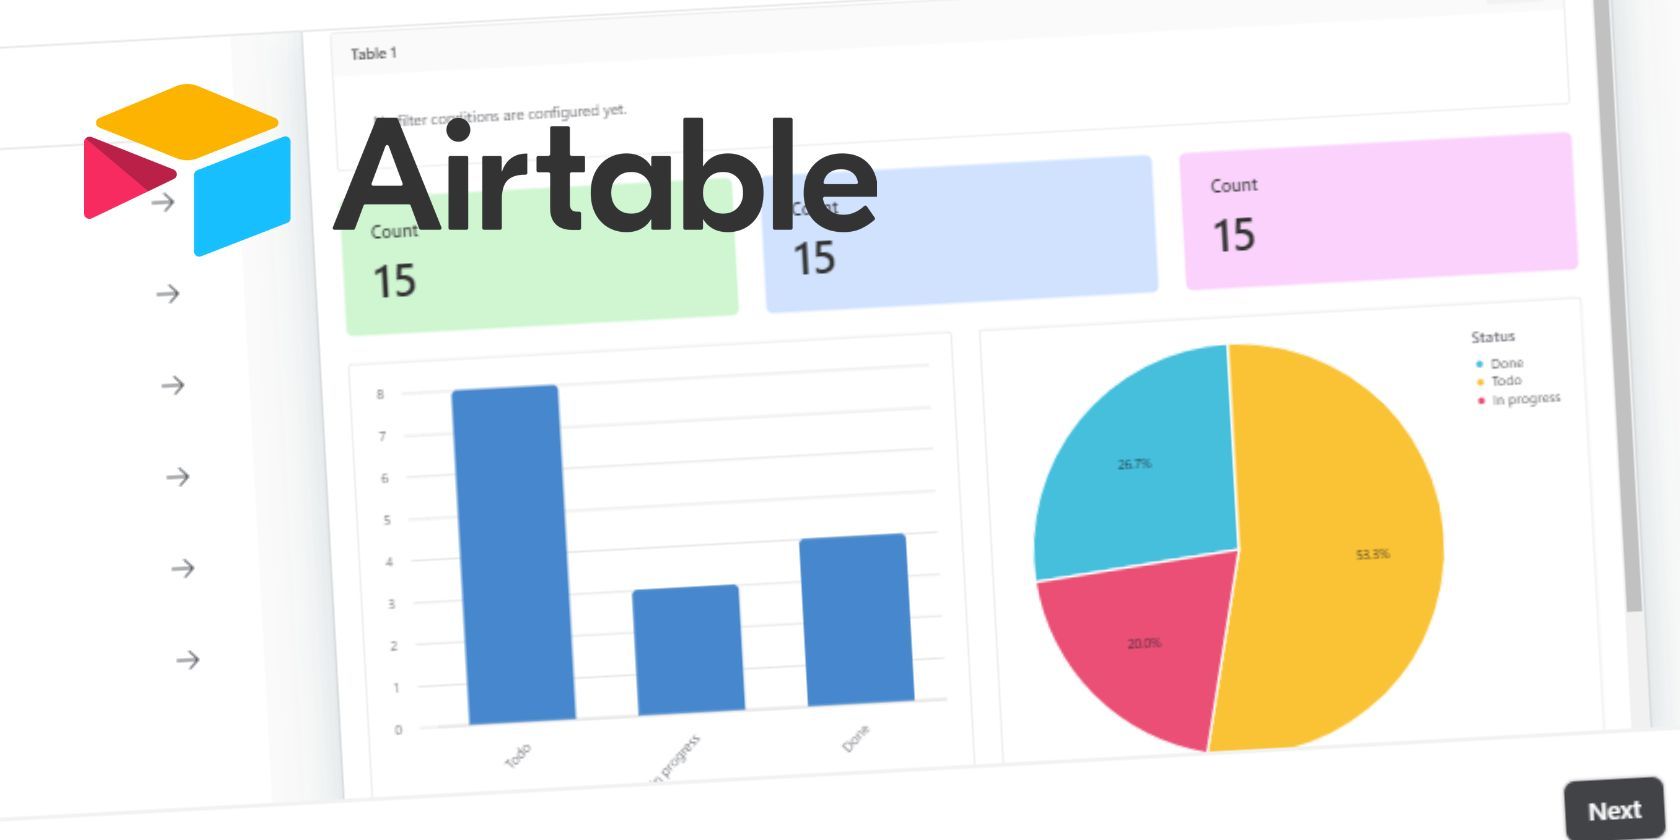 Airtable logo overlayed on a view of an Airtable interface